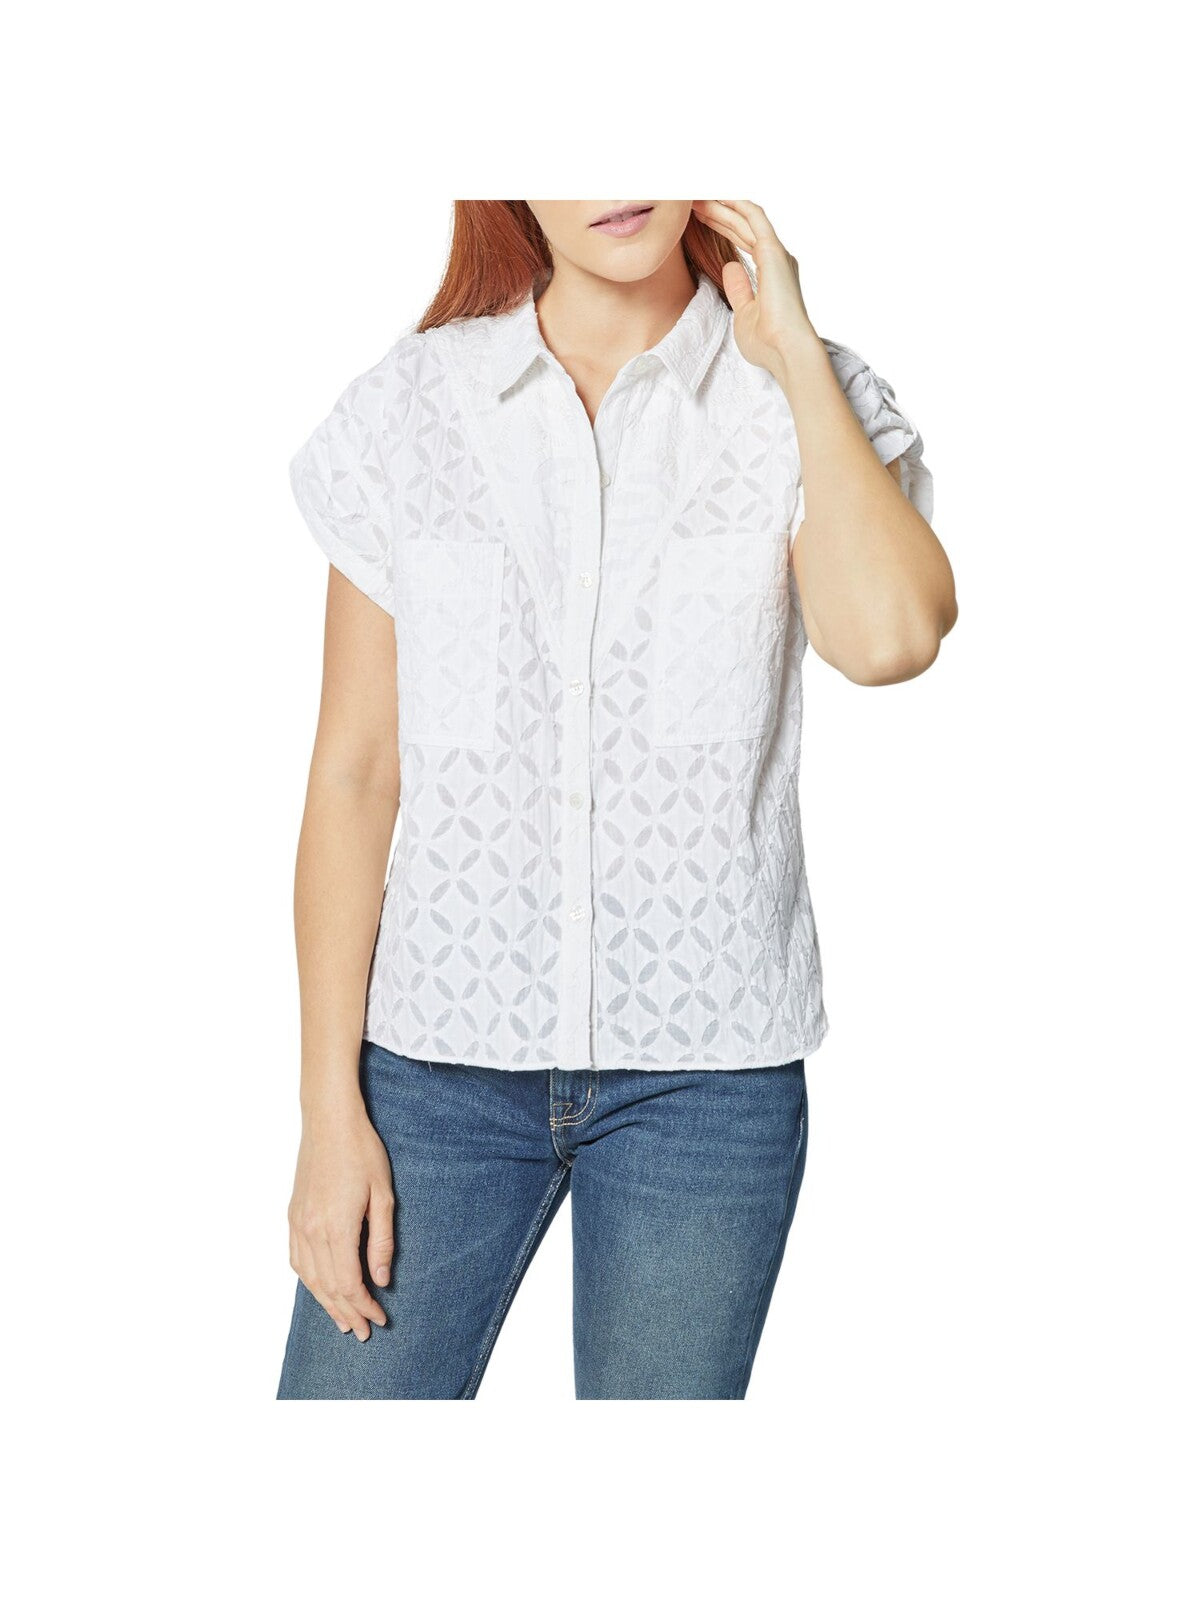 JOIE Womens White Pocketed Textured Shoulder Tabs Geometric Cap Sleeve Collared Wear To Work Button Up Top XXS